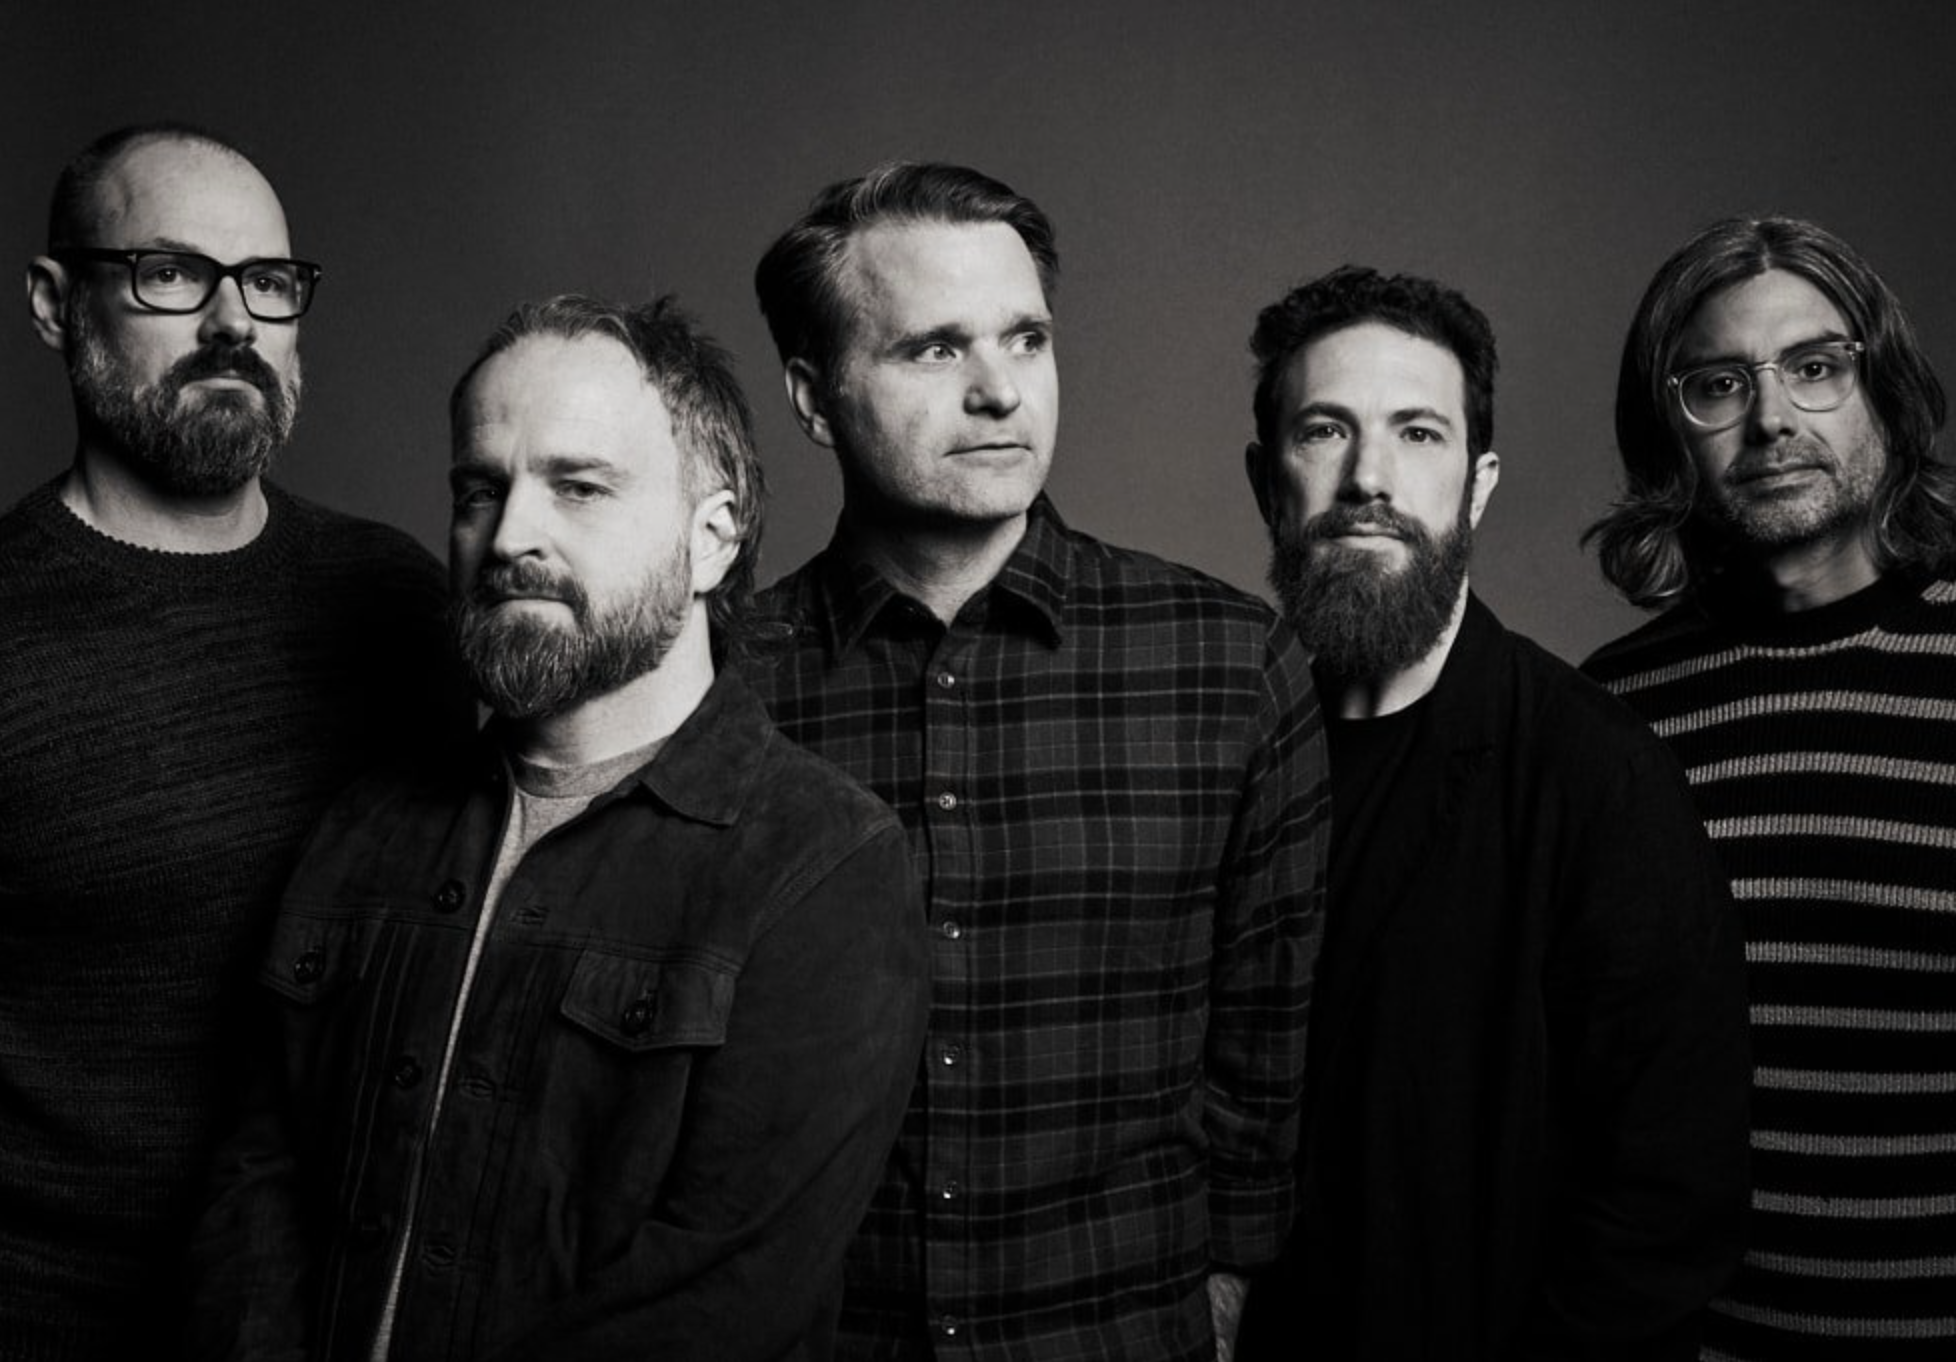 DEATH CAB FOR CUTIE RELEASES OFFICIAL MUSIC VIDEO FOR “ROMAN CANDLES”